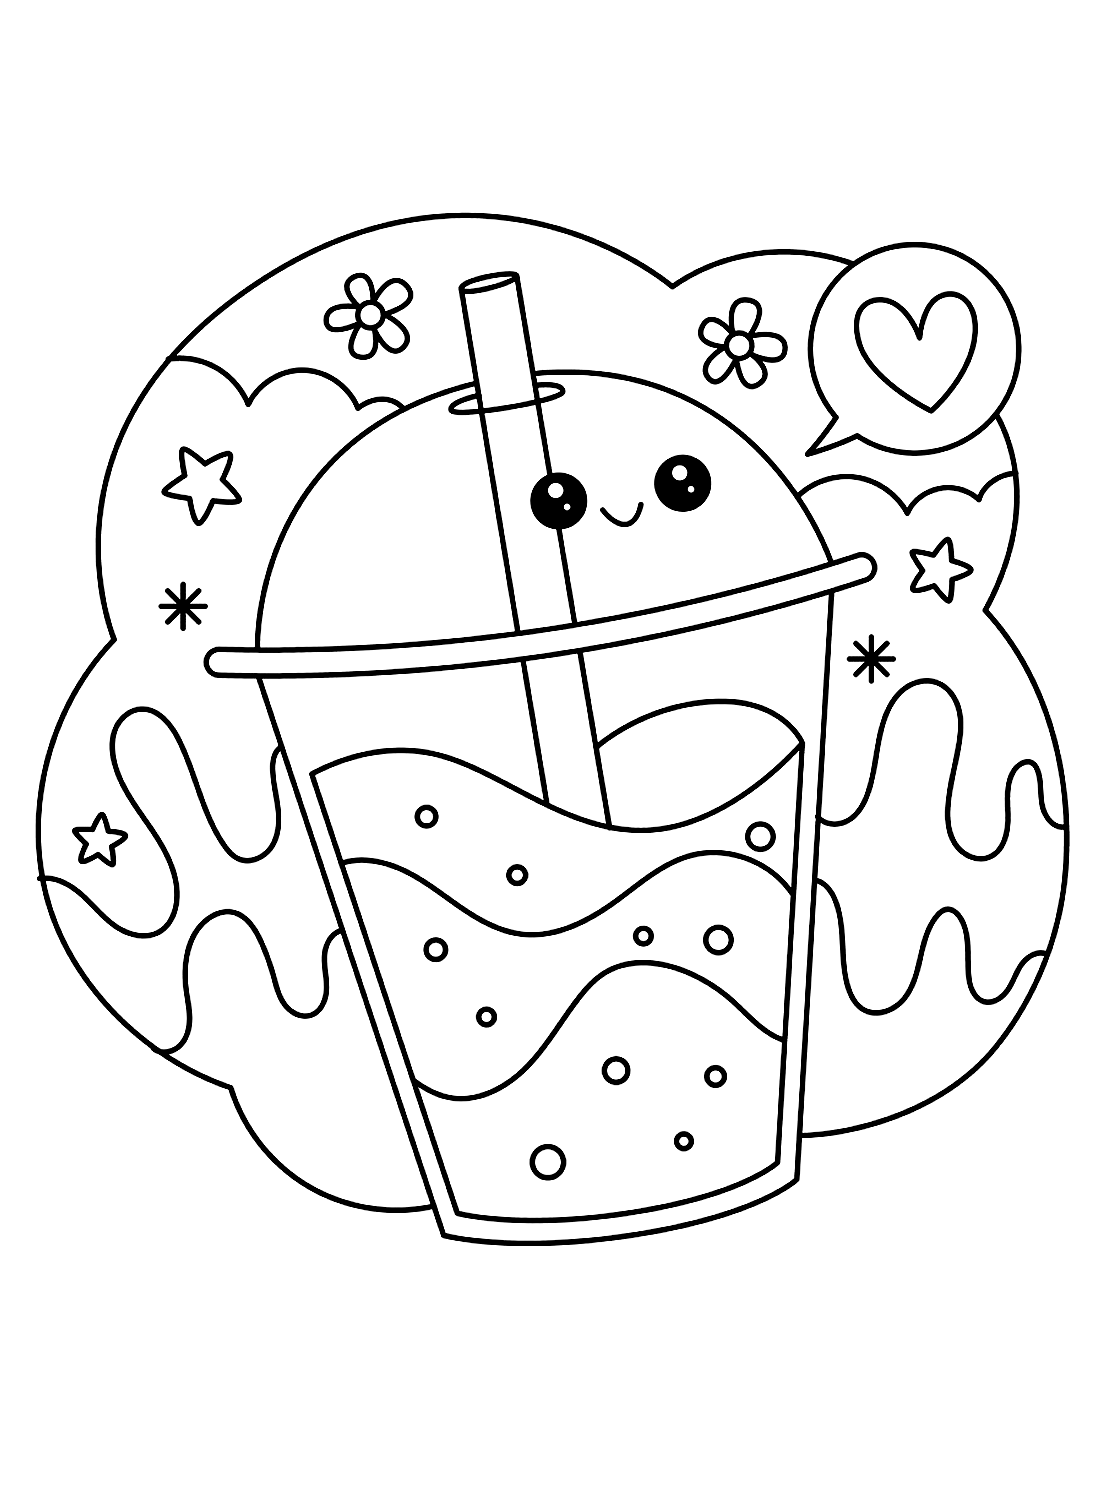 Cute fun coloring pages